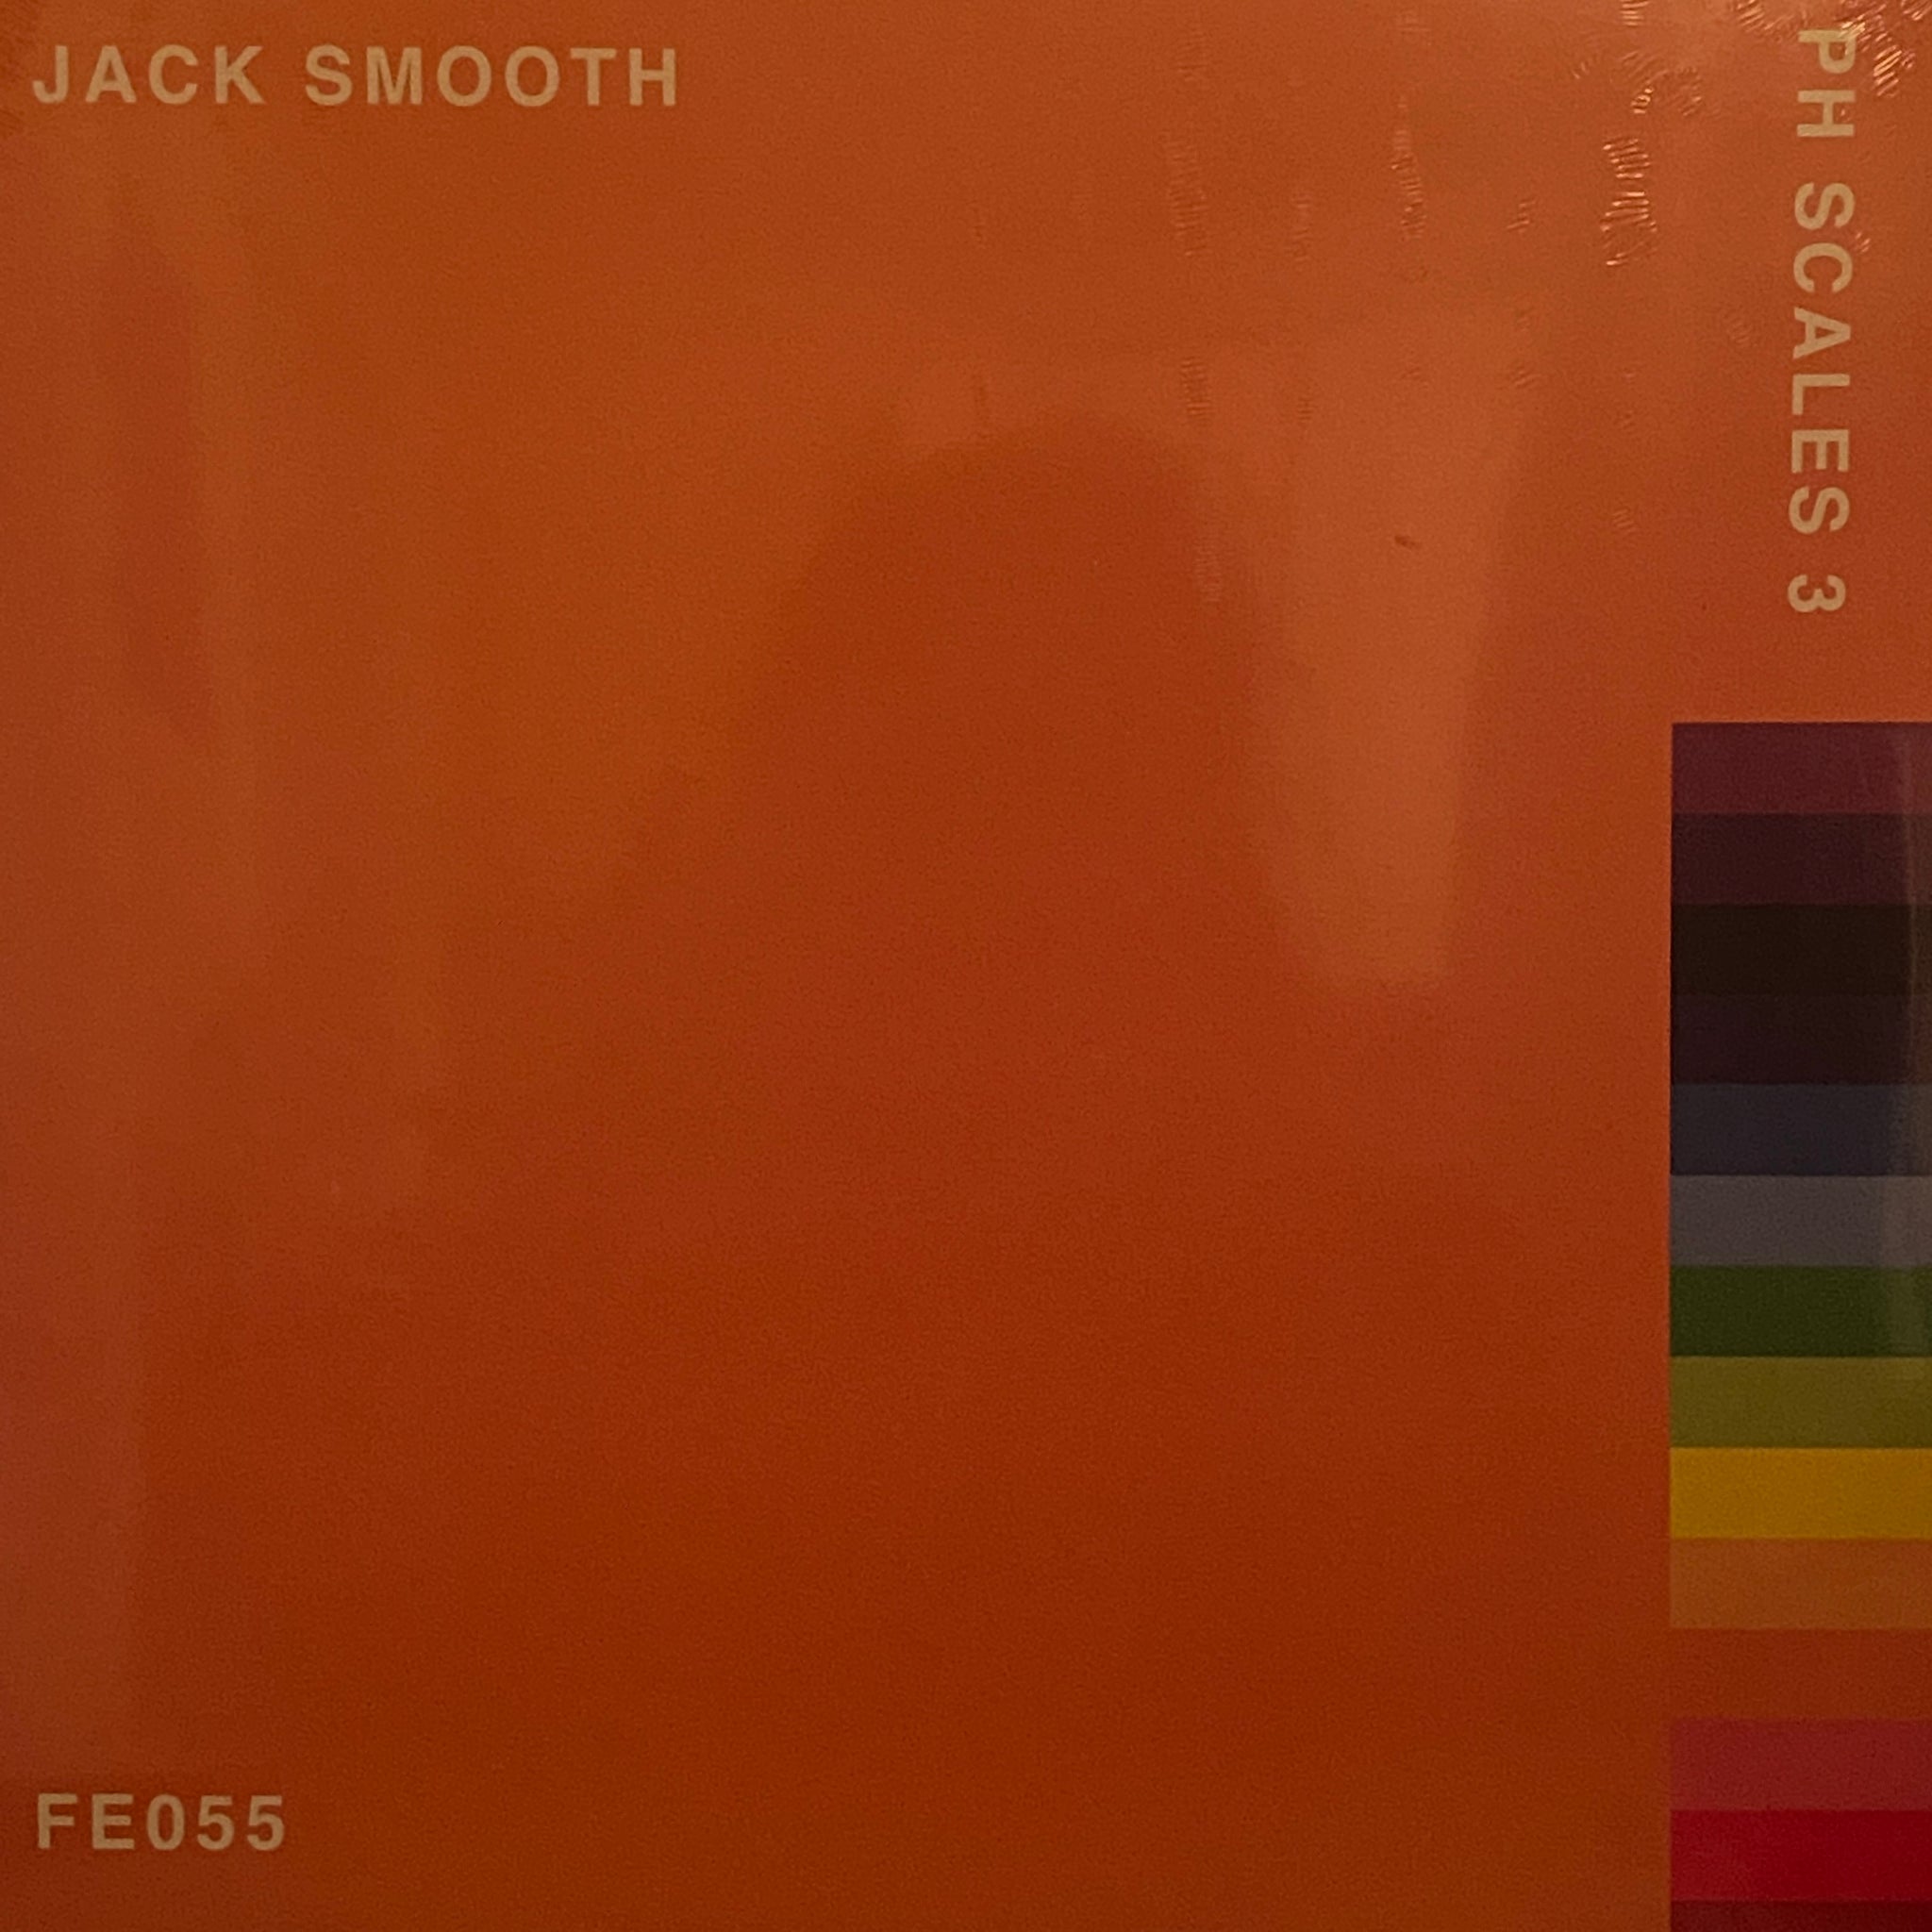 Jack Smooth ‎– Ph Scales 3